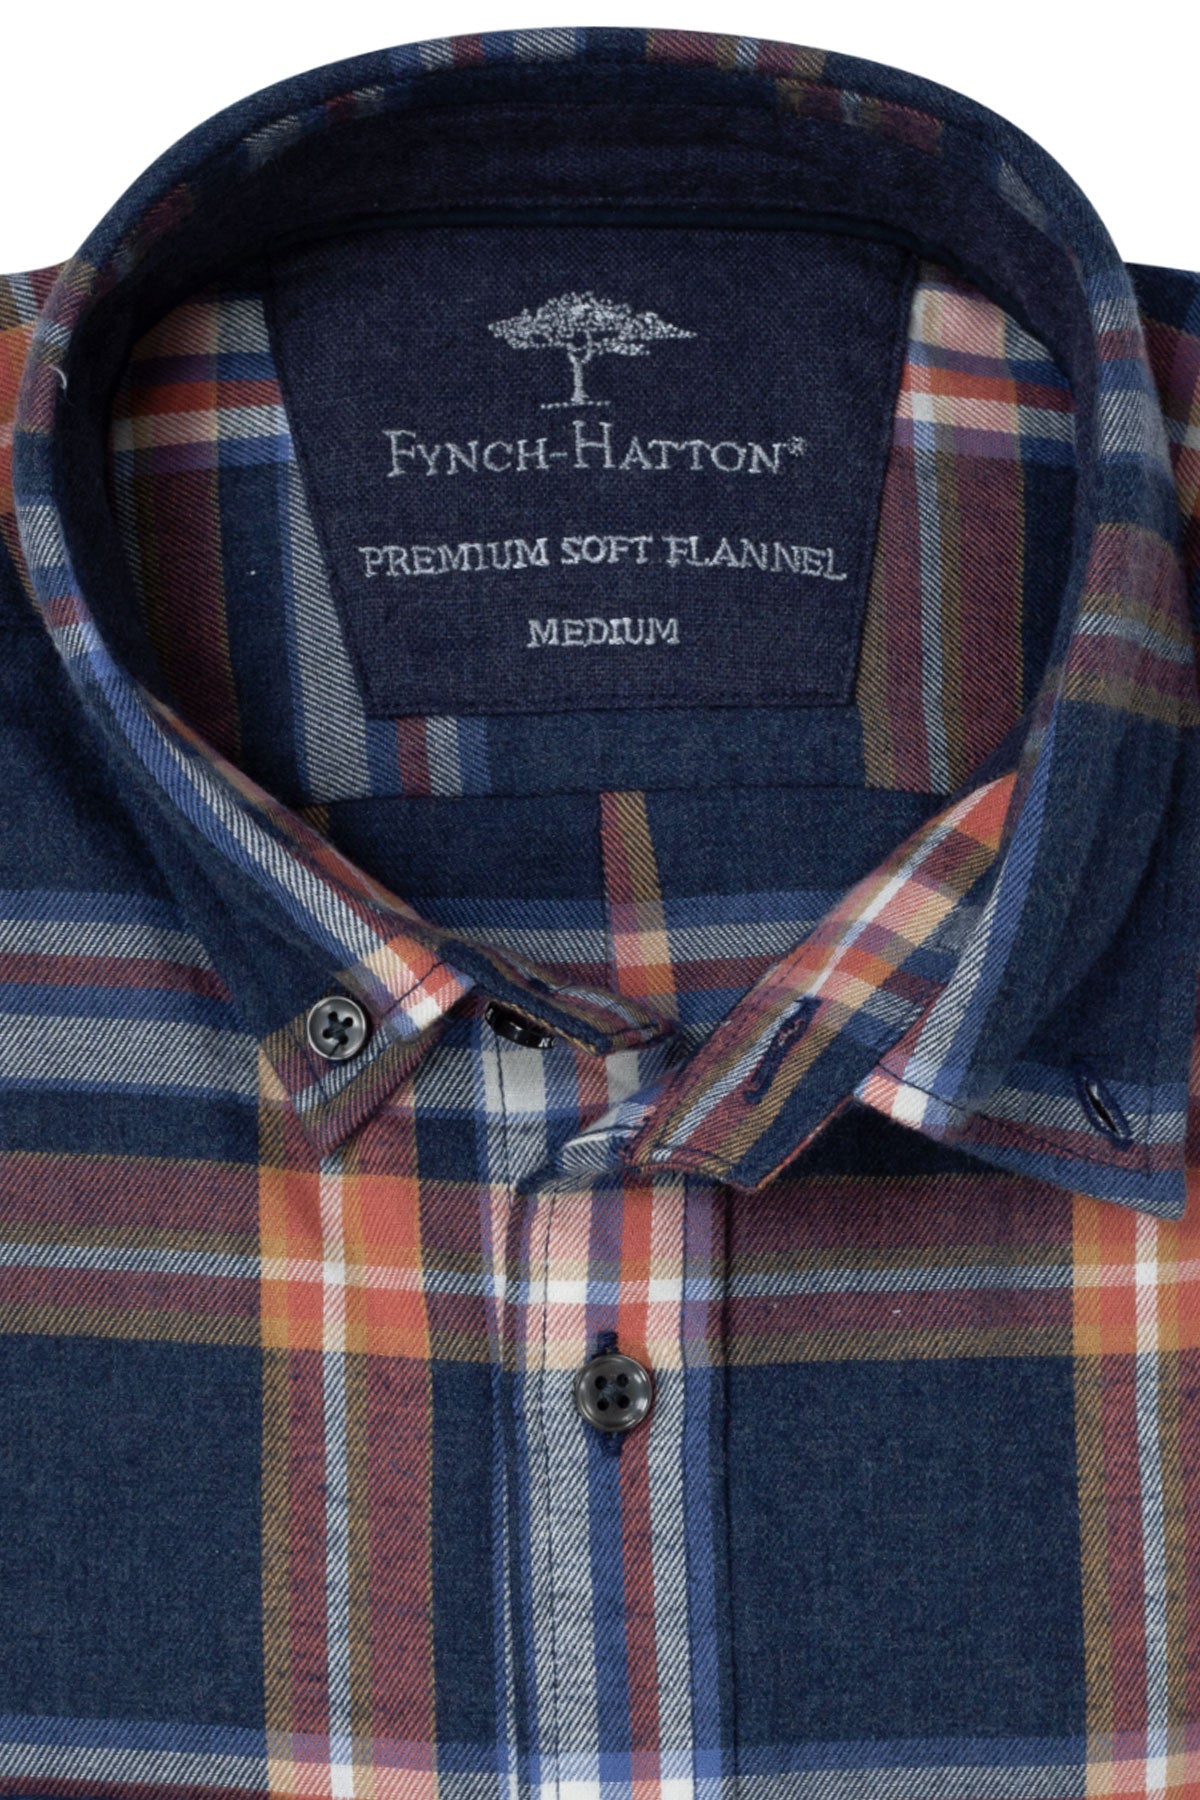 Fynch Hatton,  The Flannel Check, Long Sleeve - (12136020-6020)